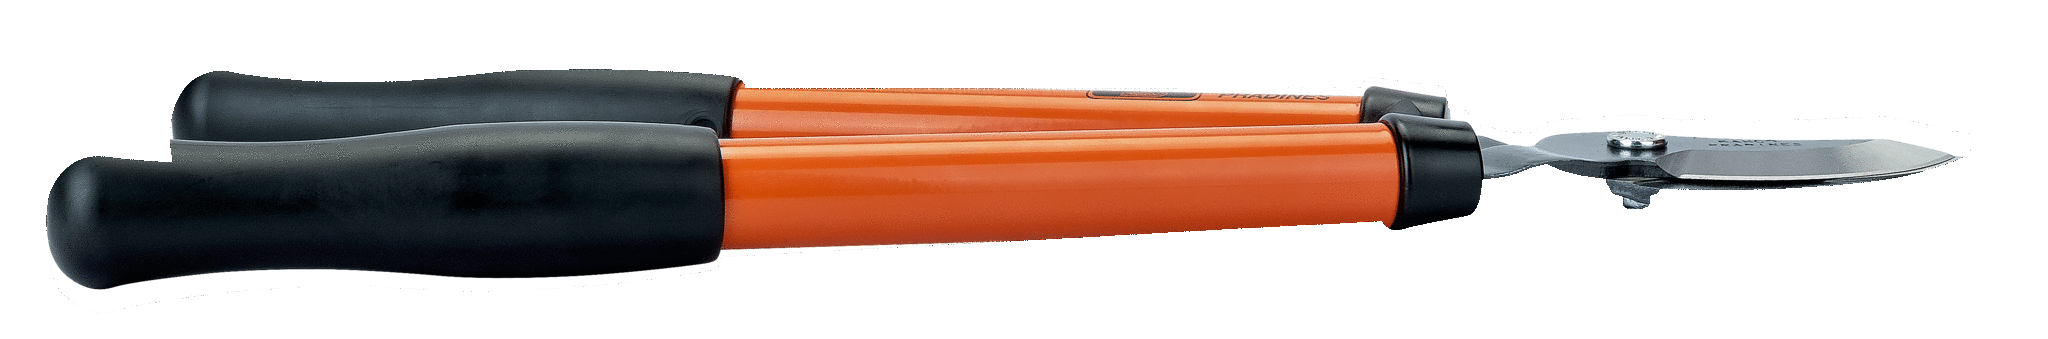 600mm 35mm Bypass Loppers with Steel Handle P140-F by Bahco